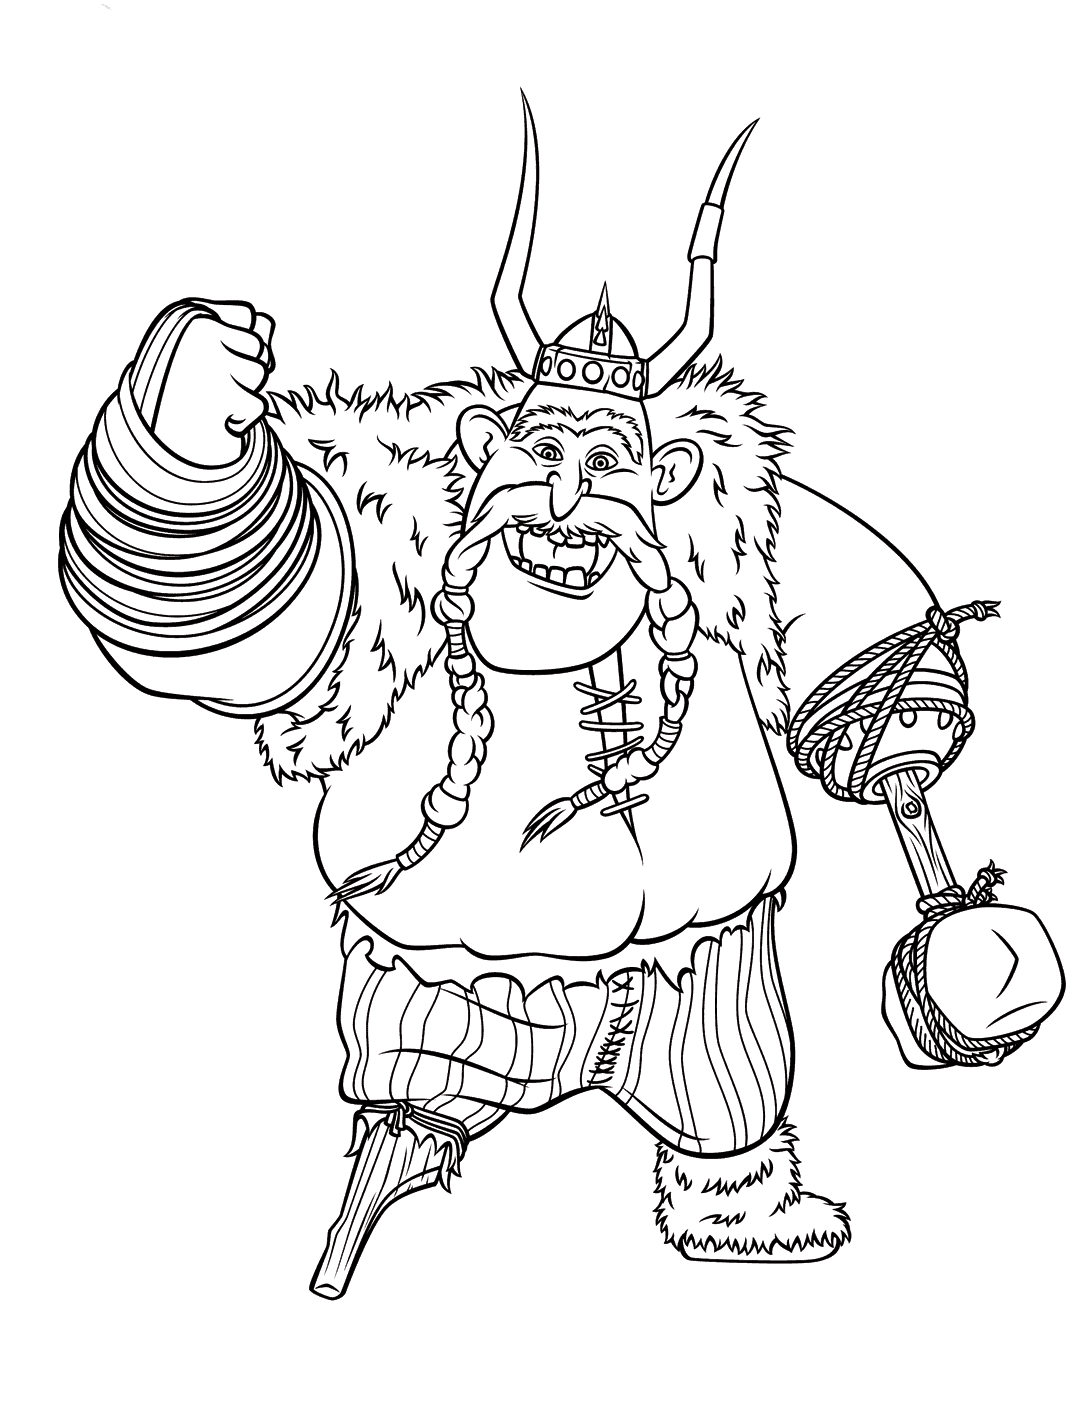 Coloring page - Viking Gobber